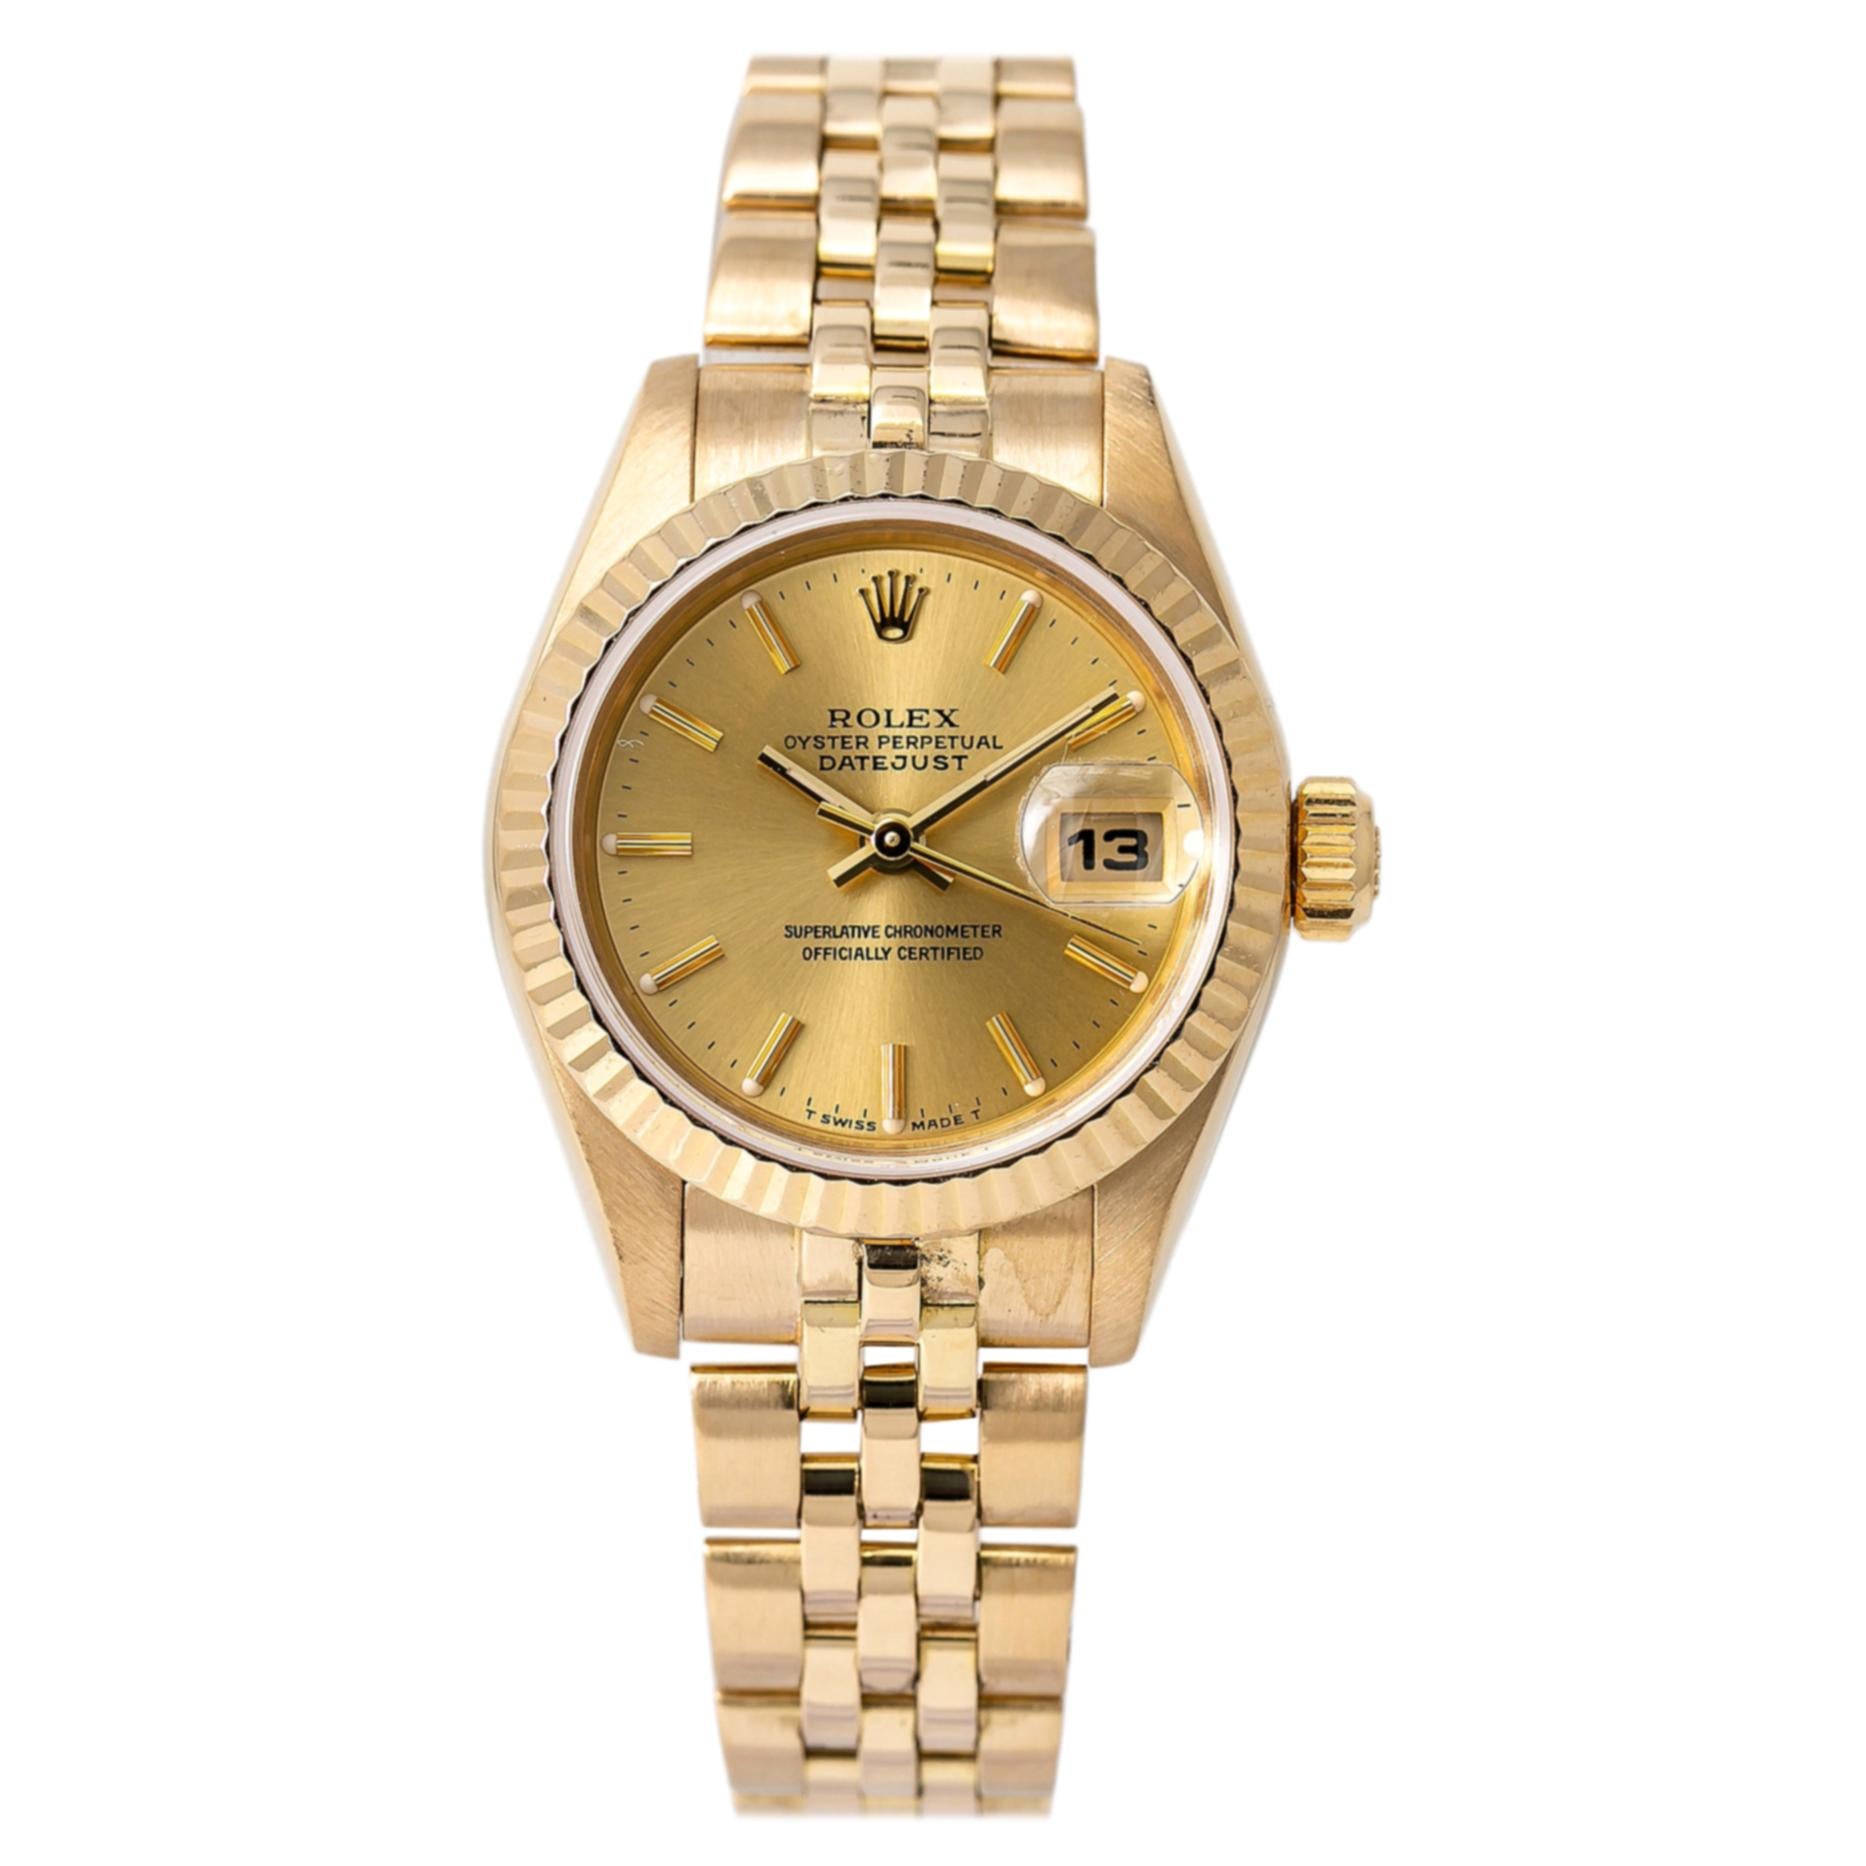 Roles Datejust 69178 Automatic Watch 18 Karat Yellow Gold Jubilee Champagne Dial